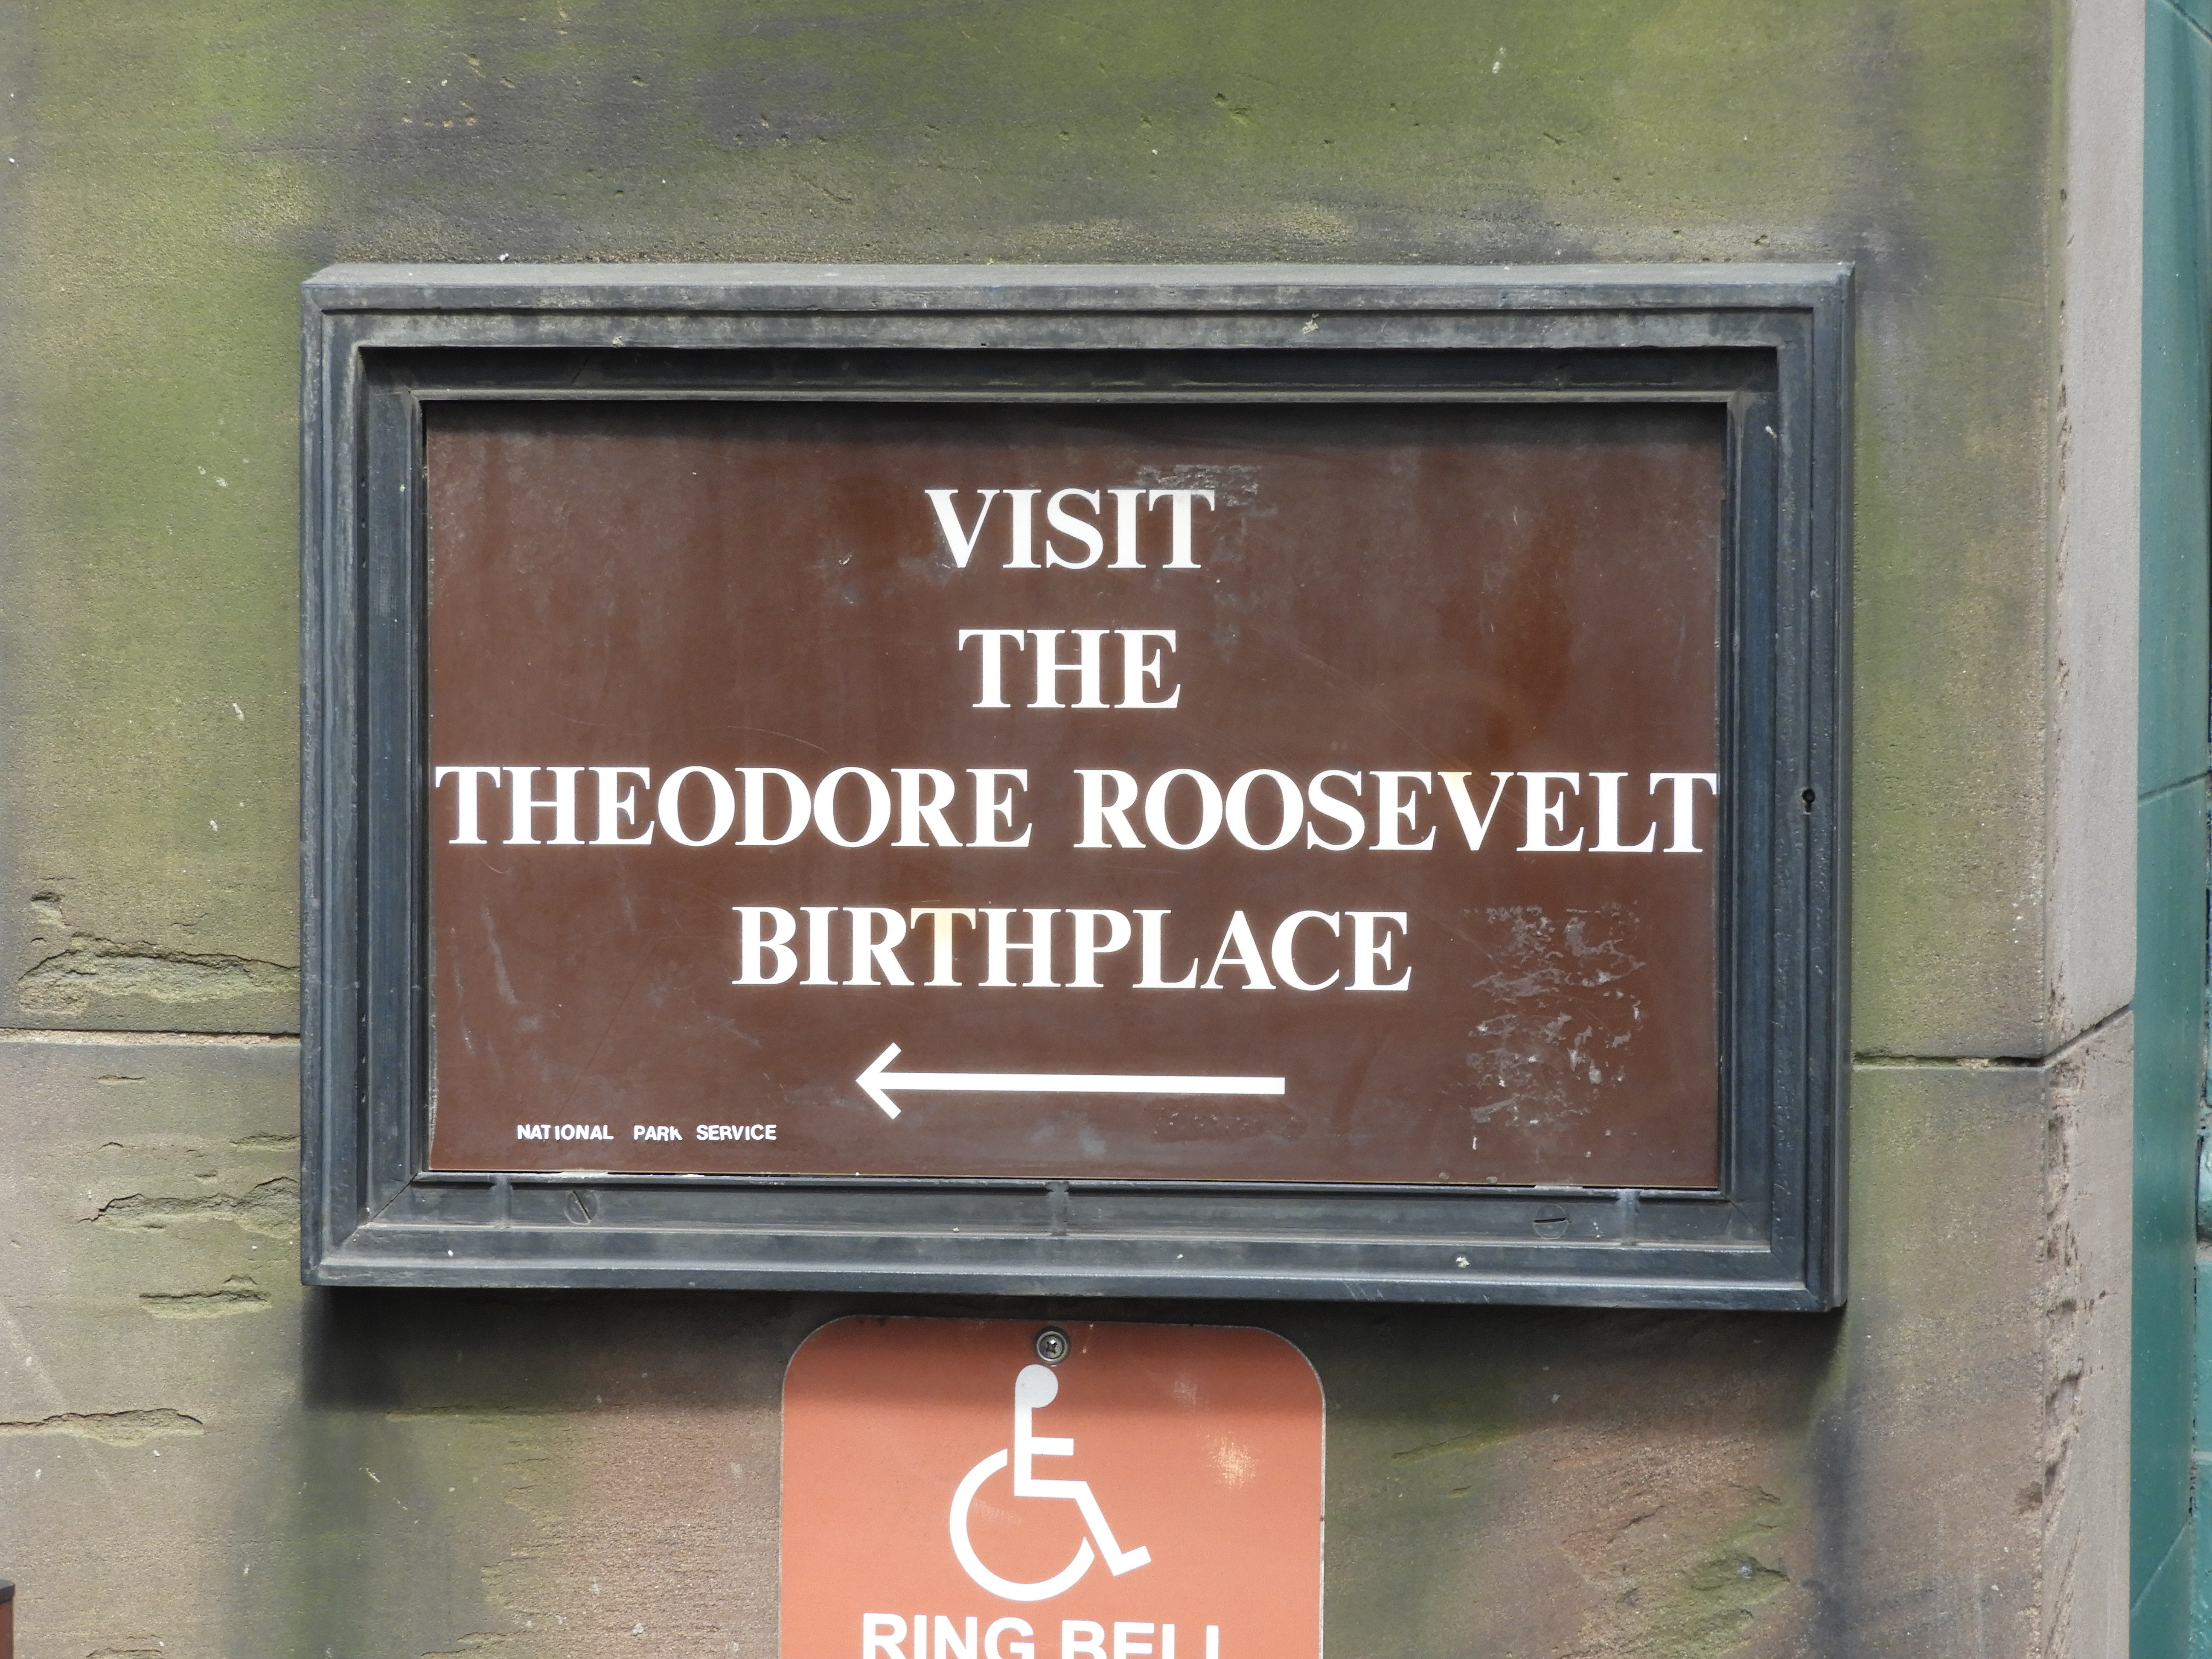 Theodore Roosevelt birthplace  1 of 1 (#t_roosevelt_birthplace_sign)